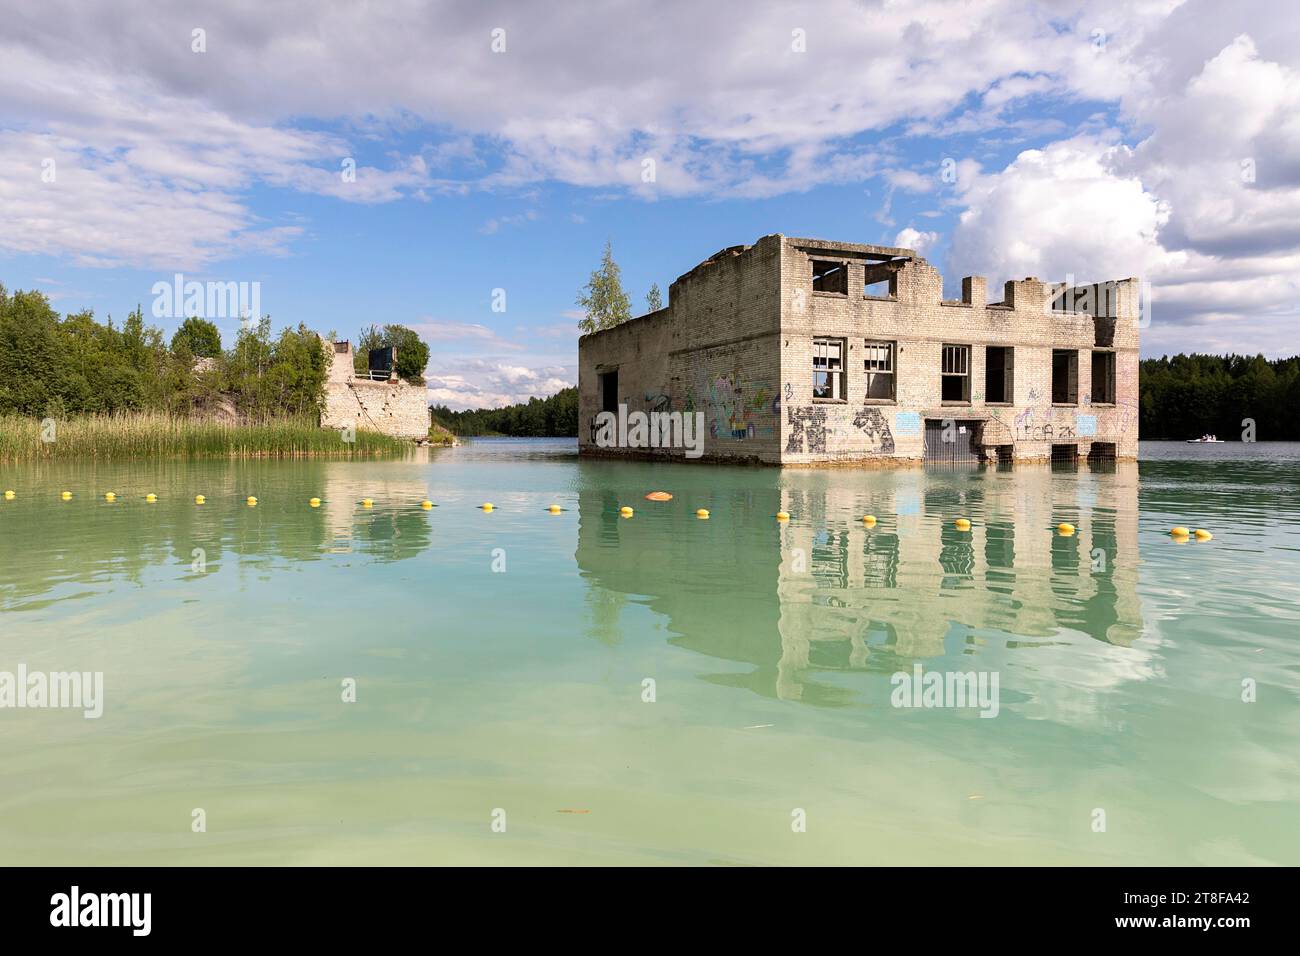 Abandoned building in Scenic Rummu quarry, former prison that was transformed to a place for tourism, for hiking swimming, Harju, Estonia Stock Photo